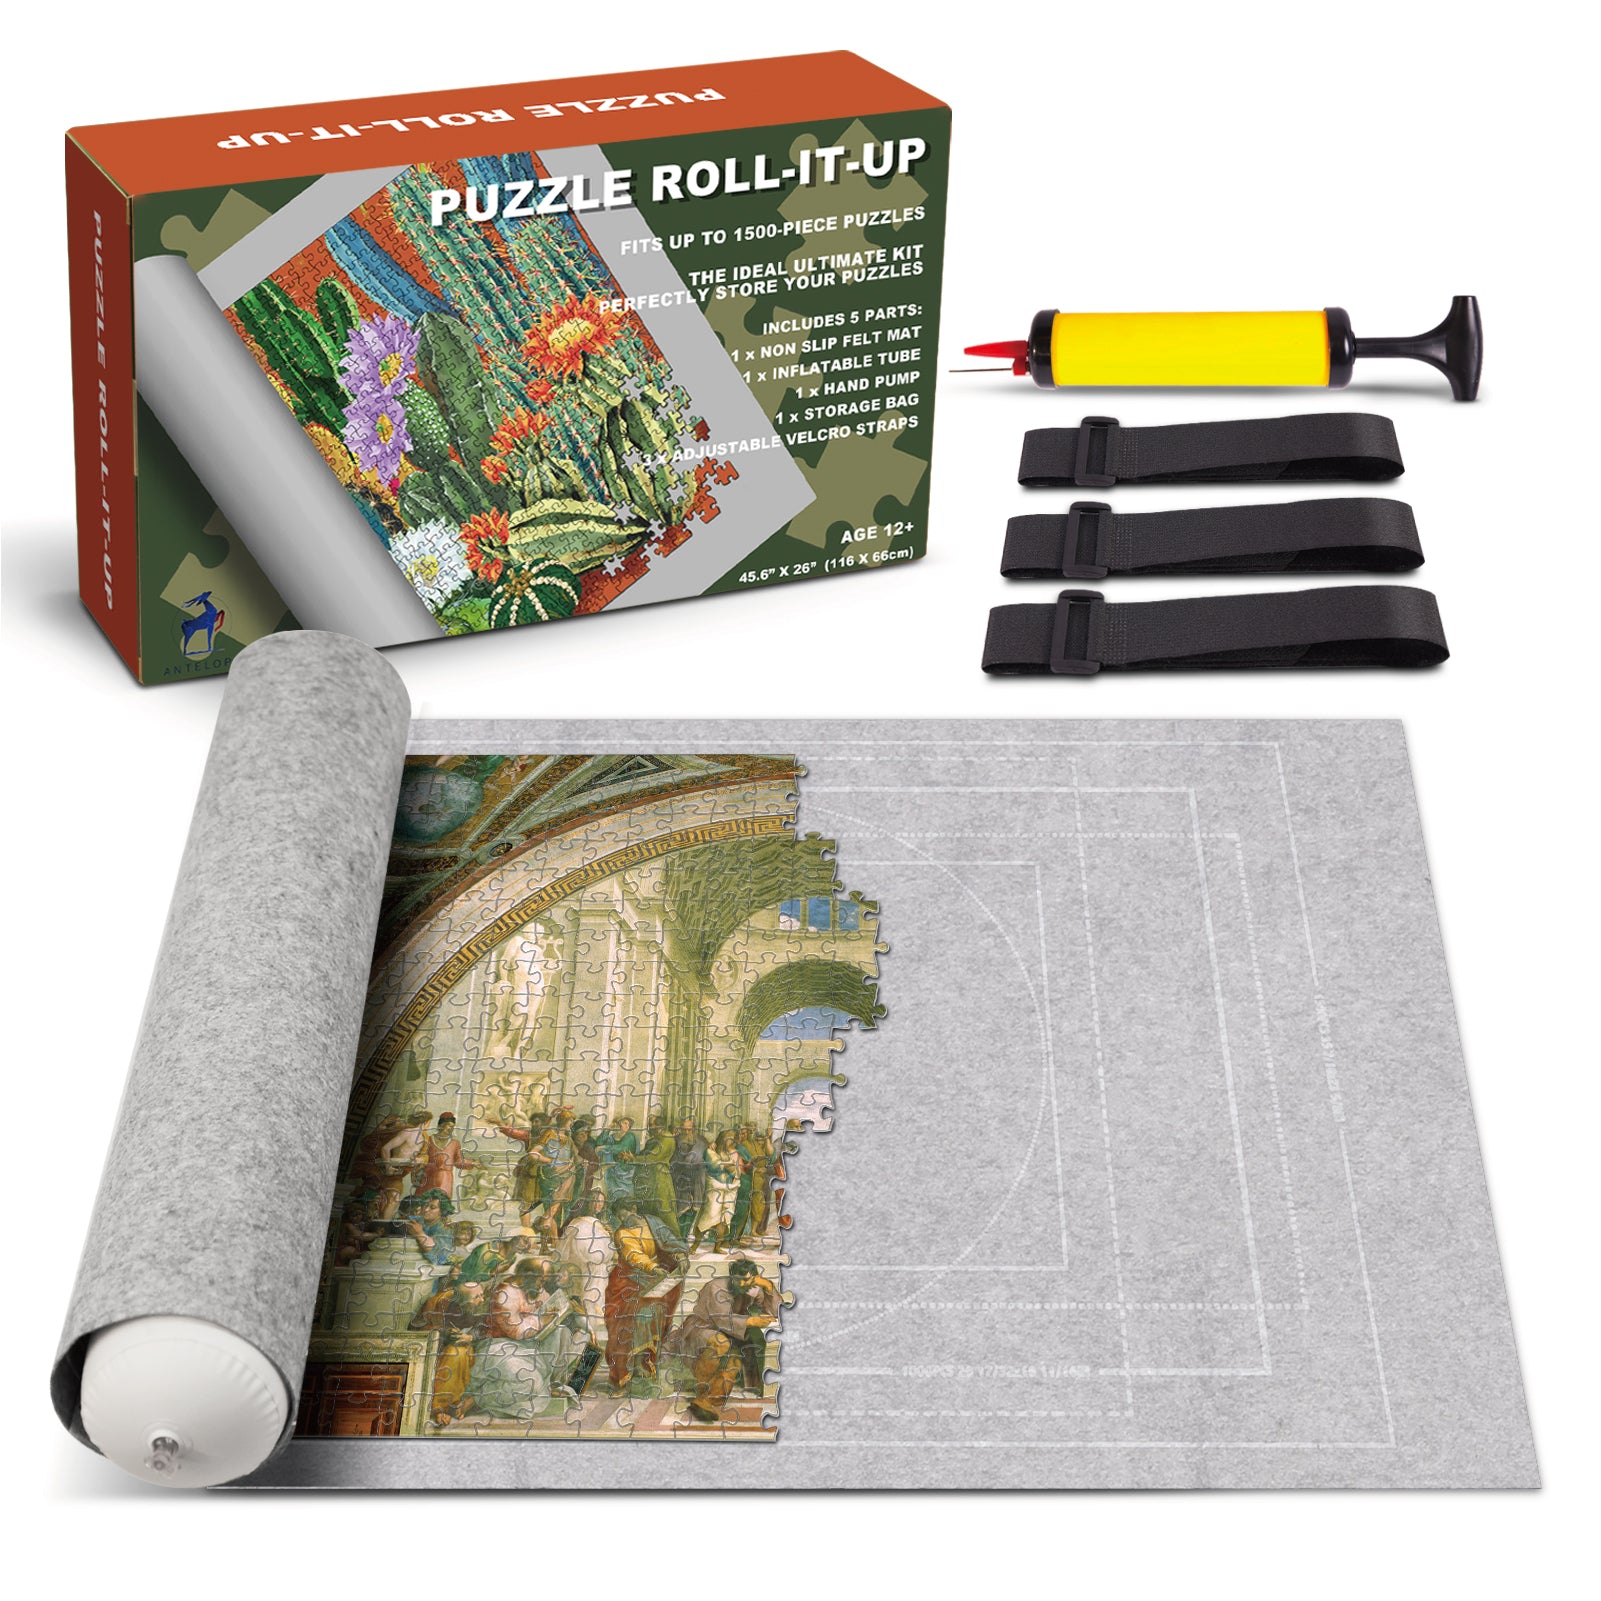 Puzzle Roll-It-Up Mat - Fits up to 1500-piece puzzles 5-piece set –  ANTELOPE PUZZLE